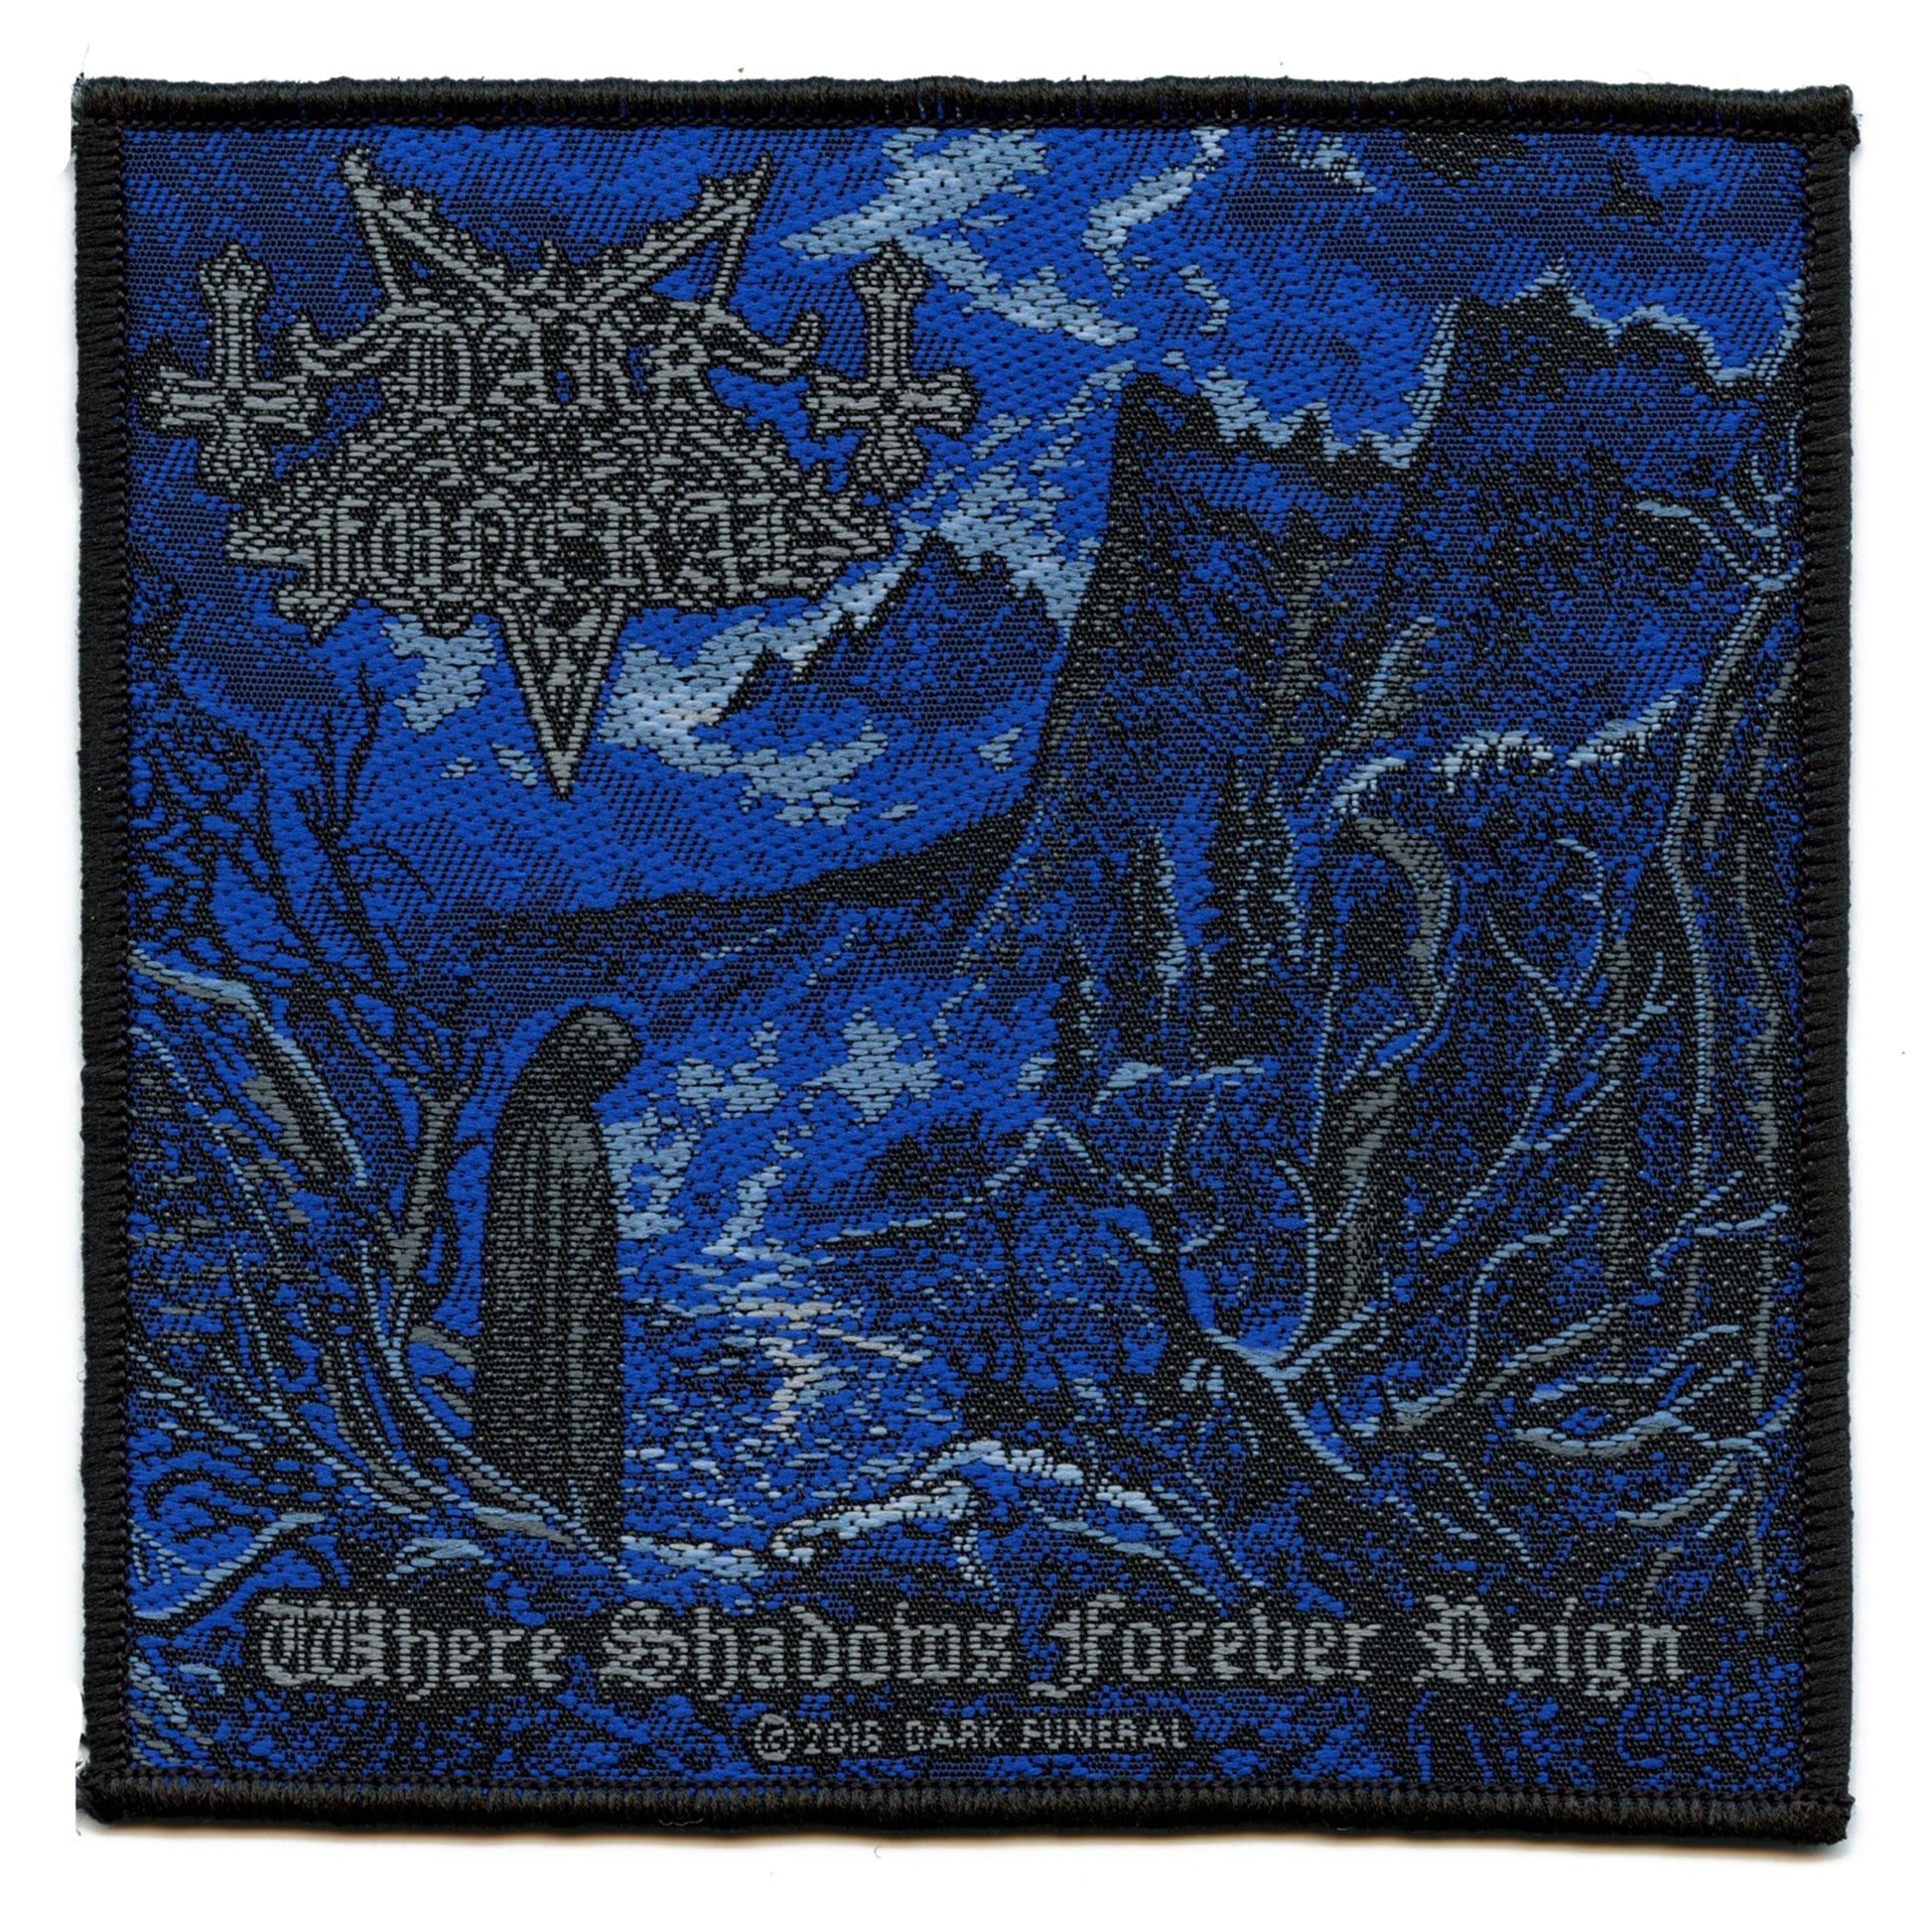 2018 Dark Funeral Where Shadows Forever Reign Woven Sew On Patch 